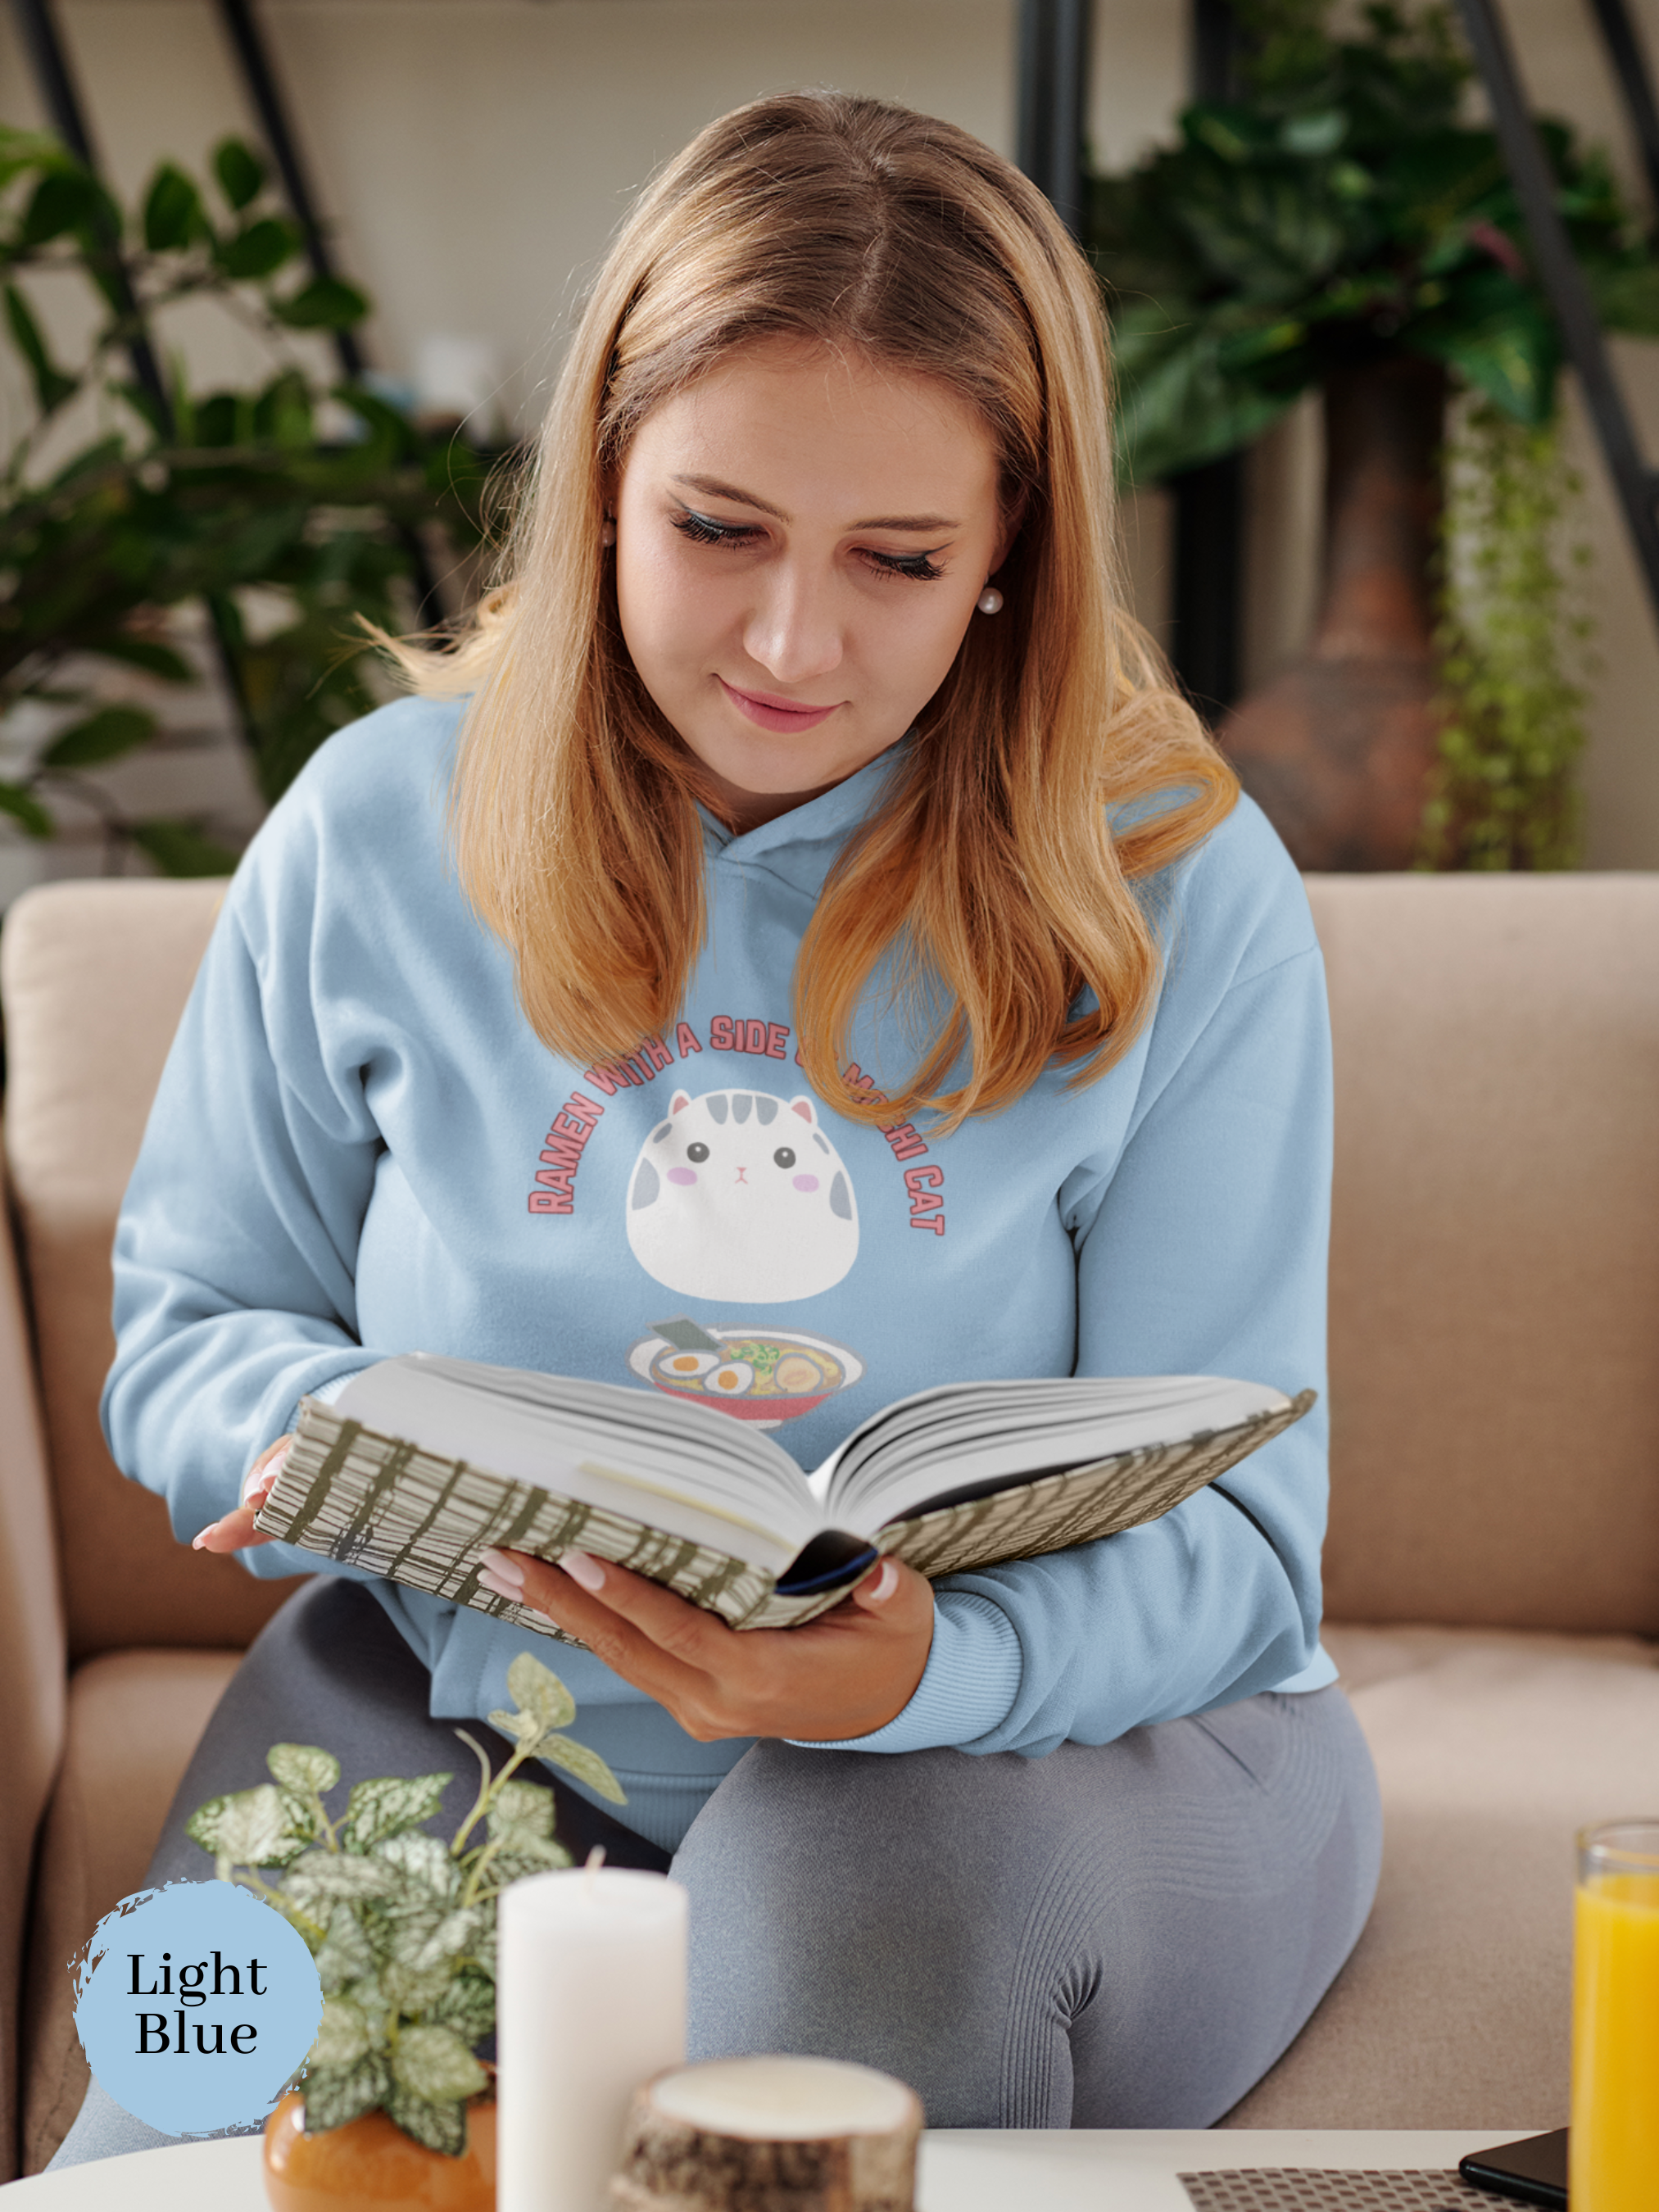 Ramen Hoodie: Mochi Cat on the Side - A Perfect Blend of Japanese Foodie Style and Cute Fluffy Feline Vibes